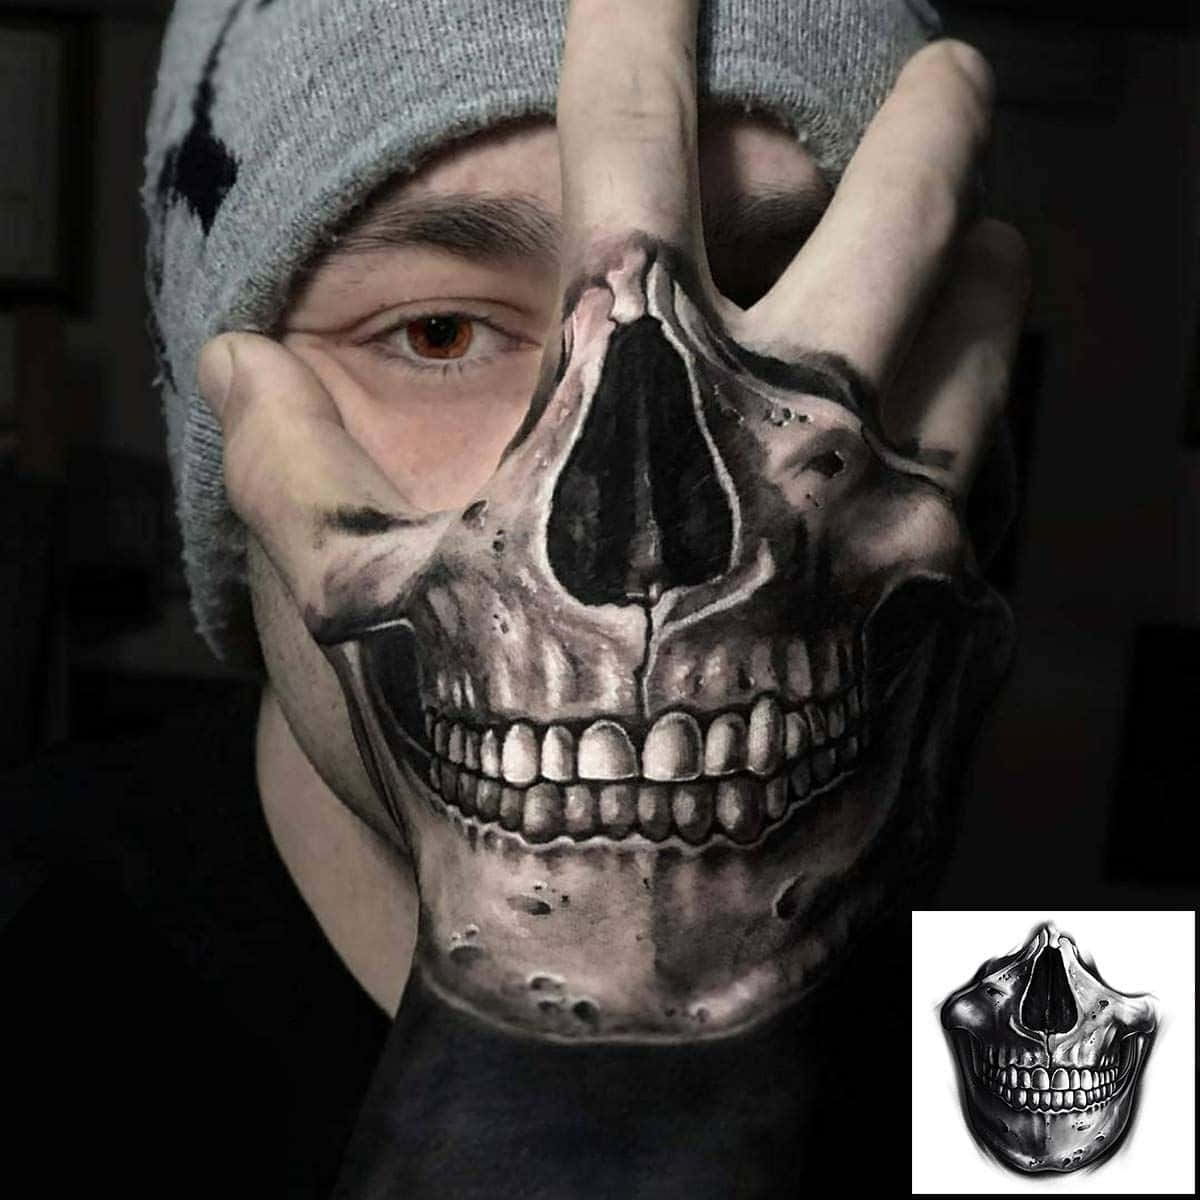 Download A Man With A Skull Tattoo On His Hand | Wallpapers.com